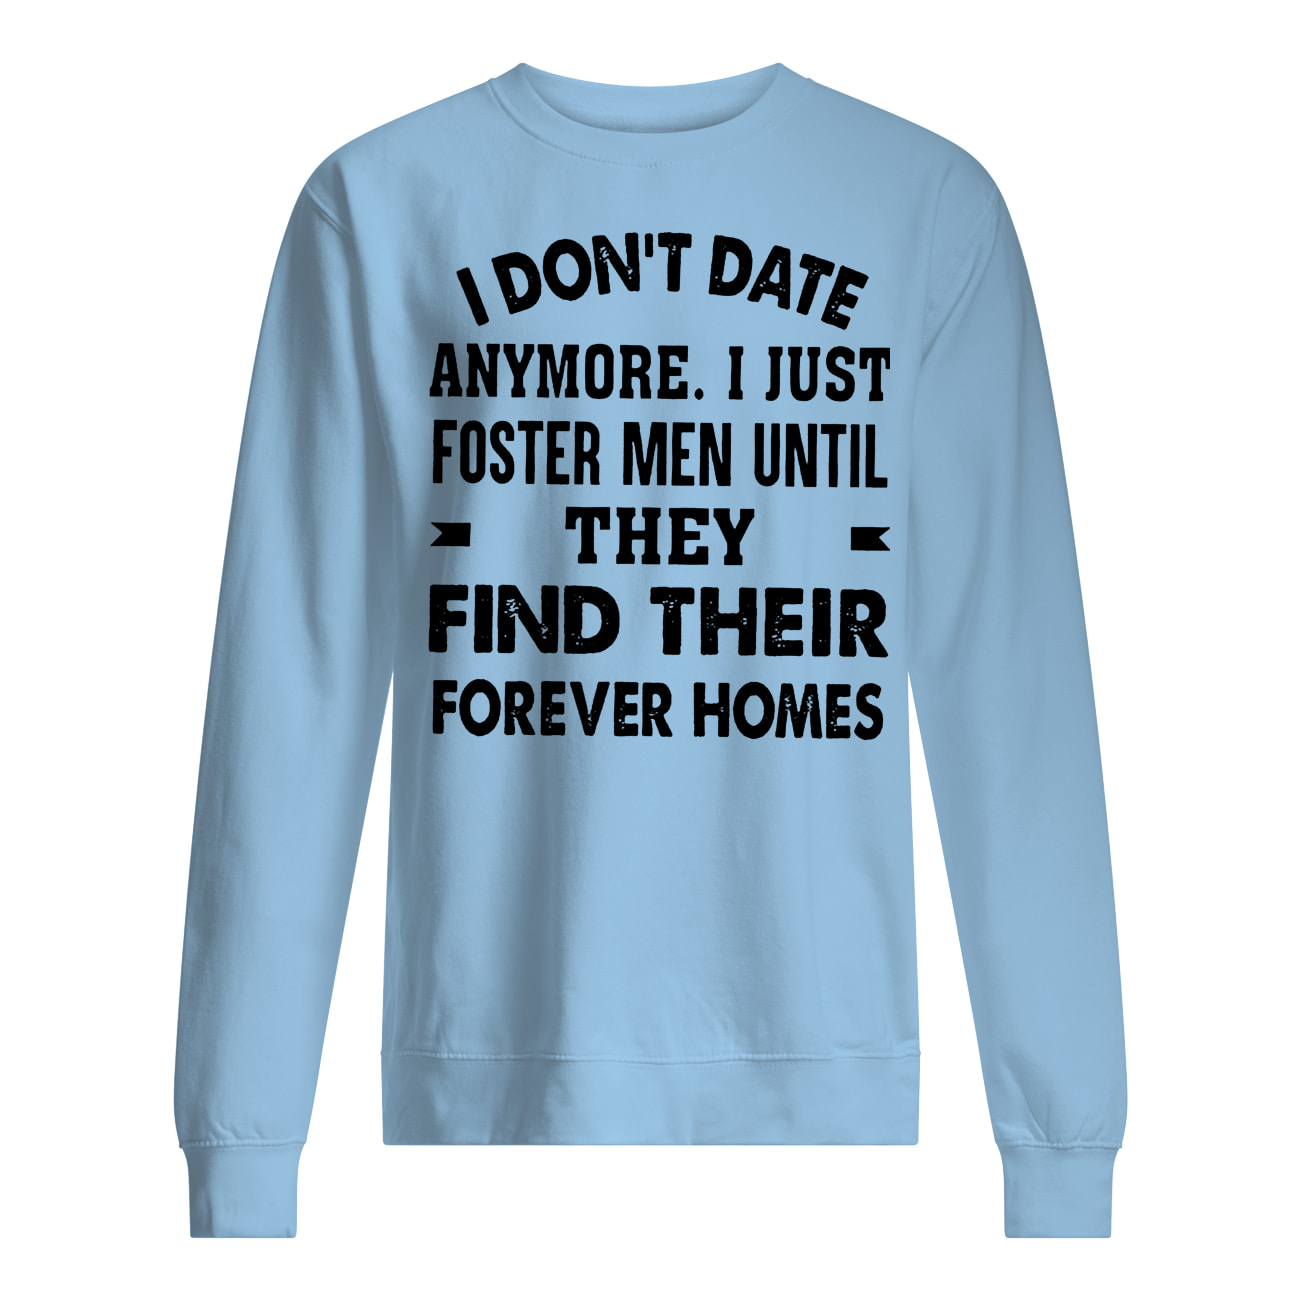 I don't date anymore I just foster men until they find their forever homes sweatshirt